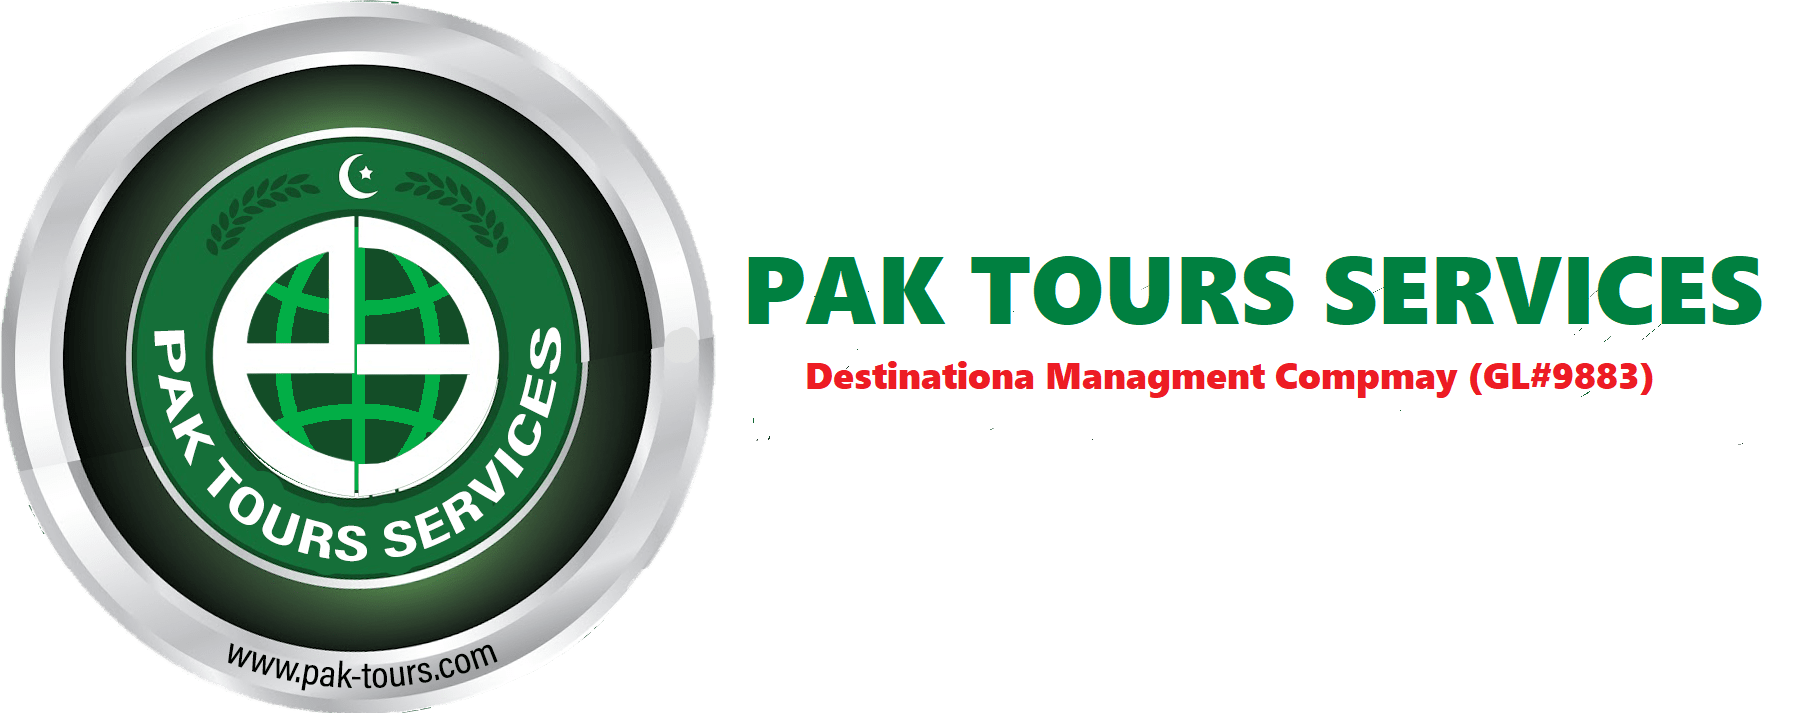 Your Trusted Travel Partner | Skardu Honeymoon Packages (Luxury Tour) 5 Days -